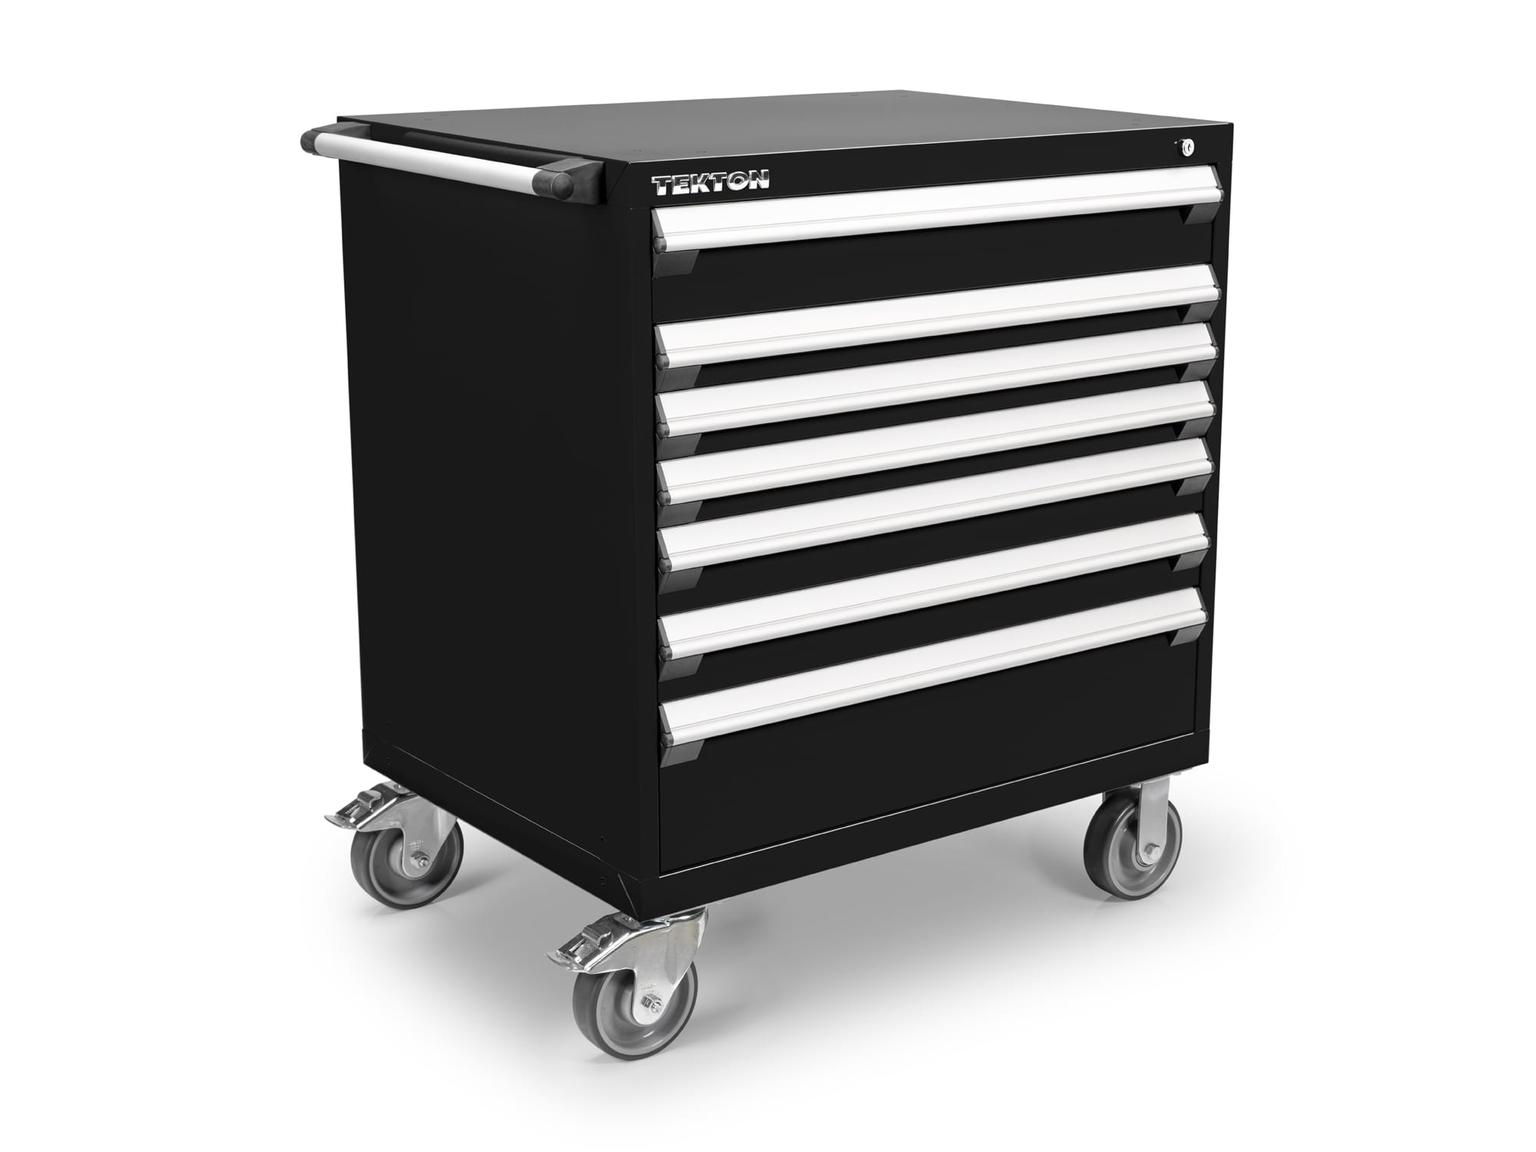 7-Drawer Tool Cabinet, Black (36 W x 27 D x 41.5 H in.)